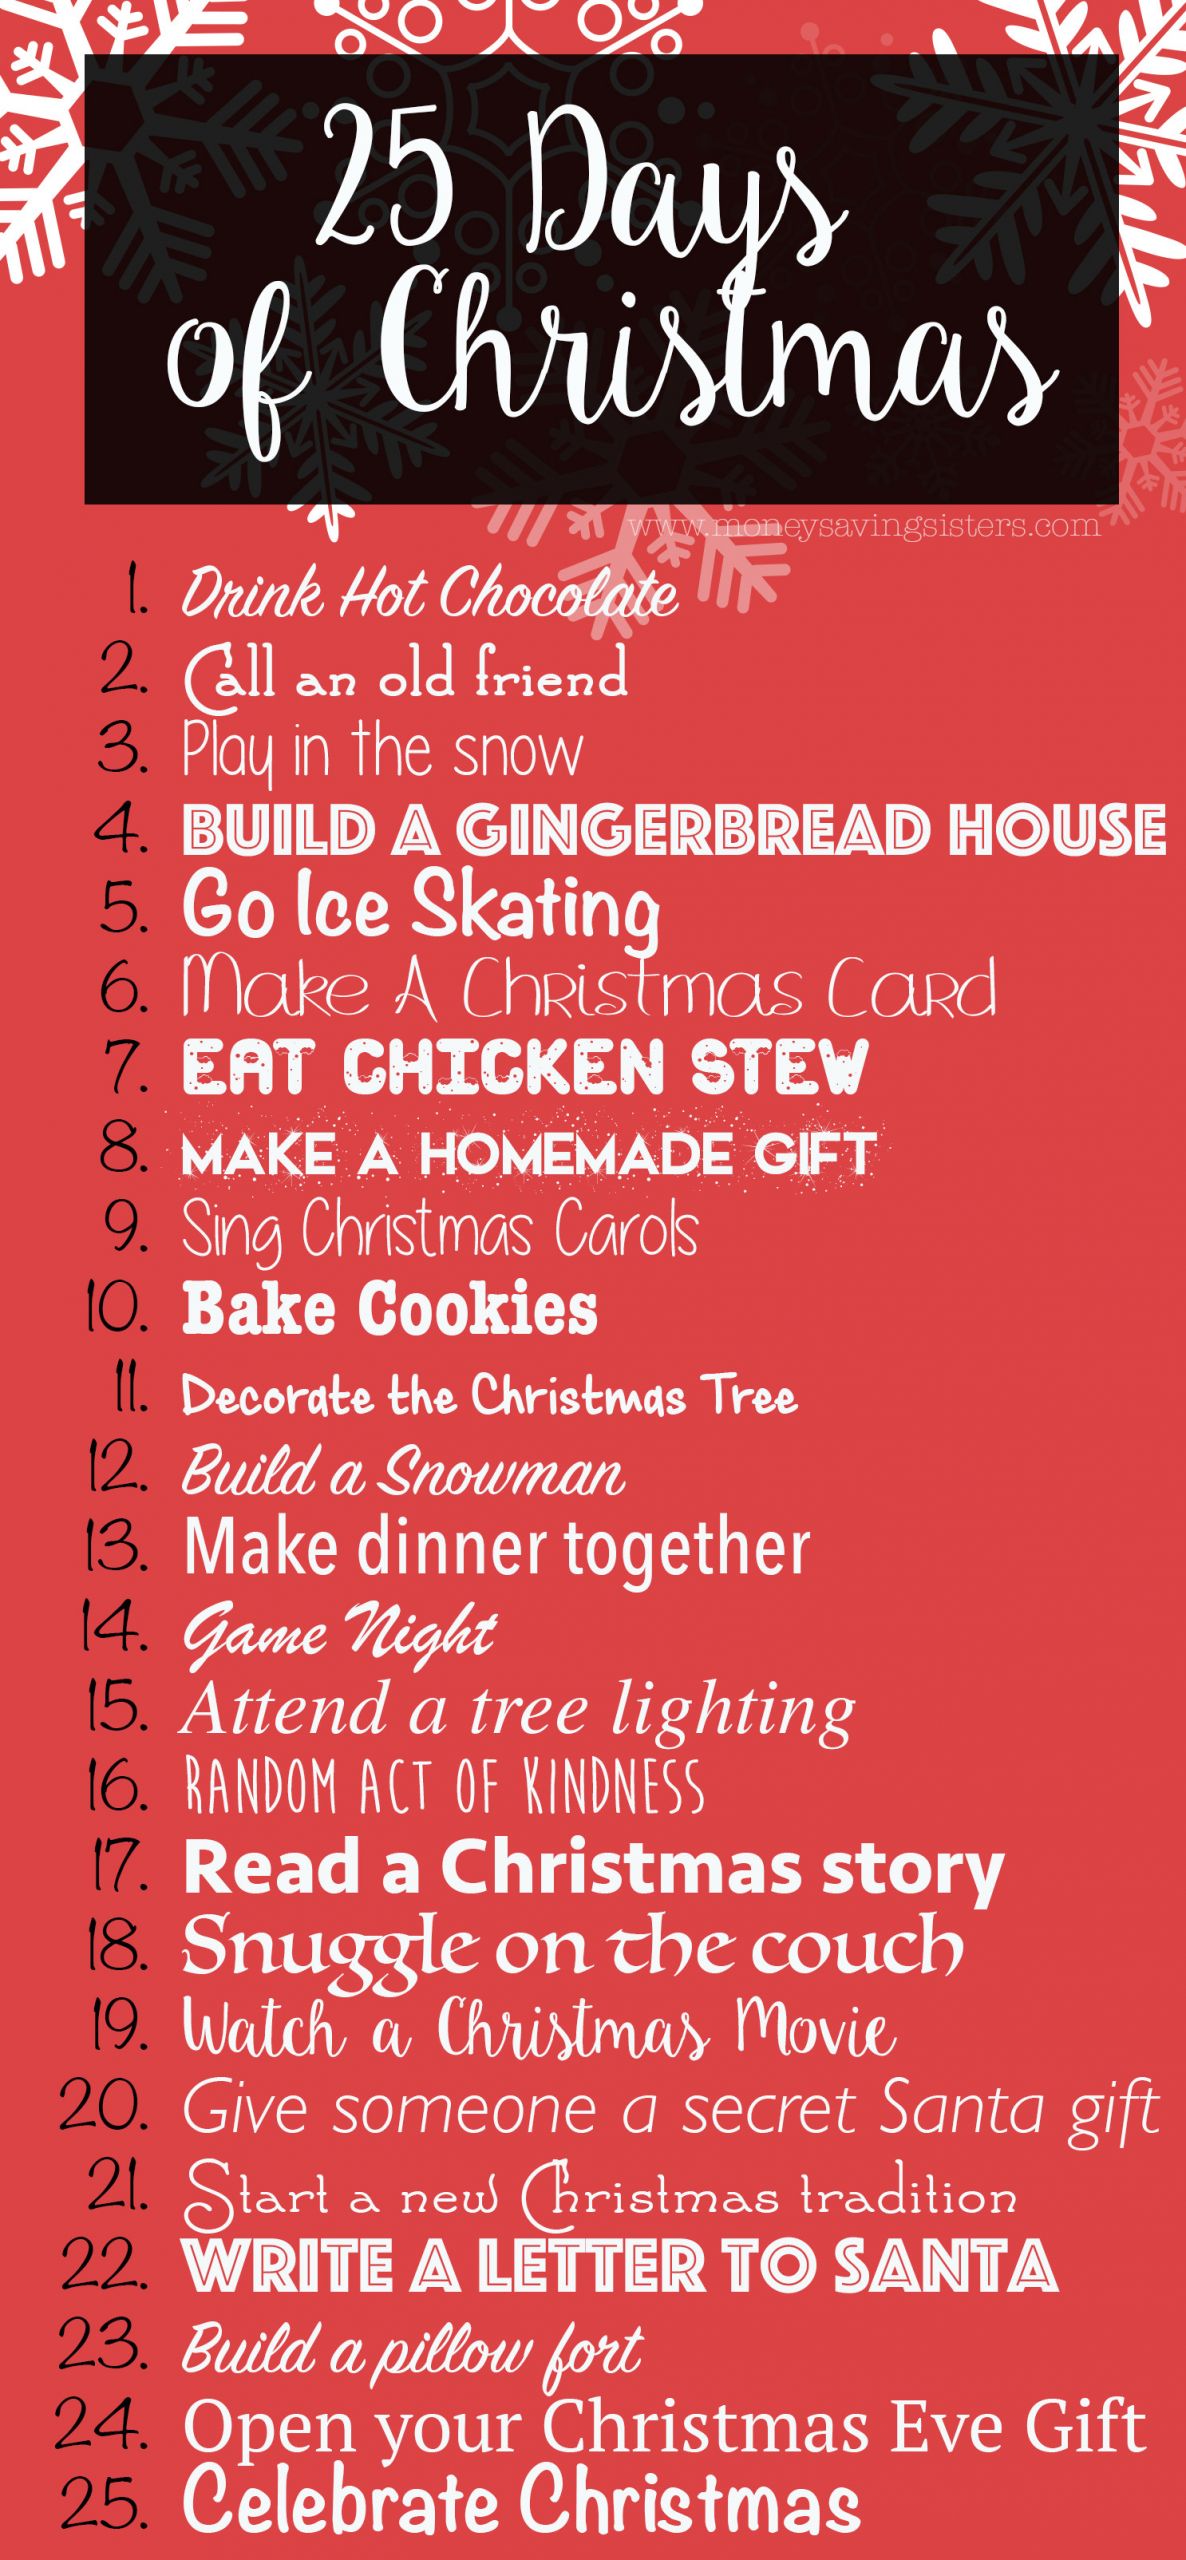 25 Days Of Christmas Ideas
 25 Days of Christmas Activities for the Entire Family